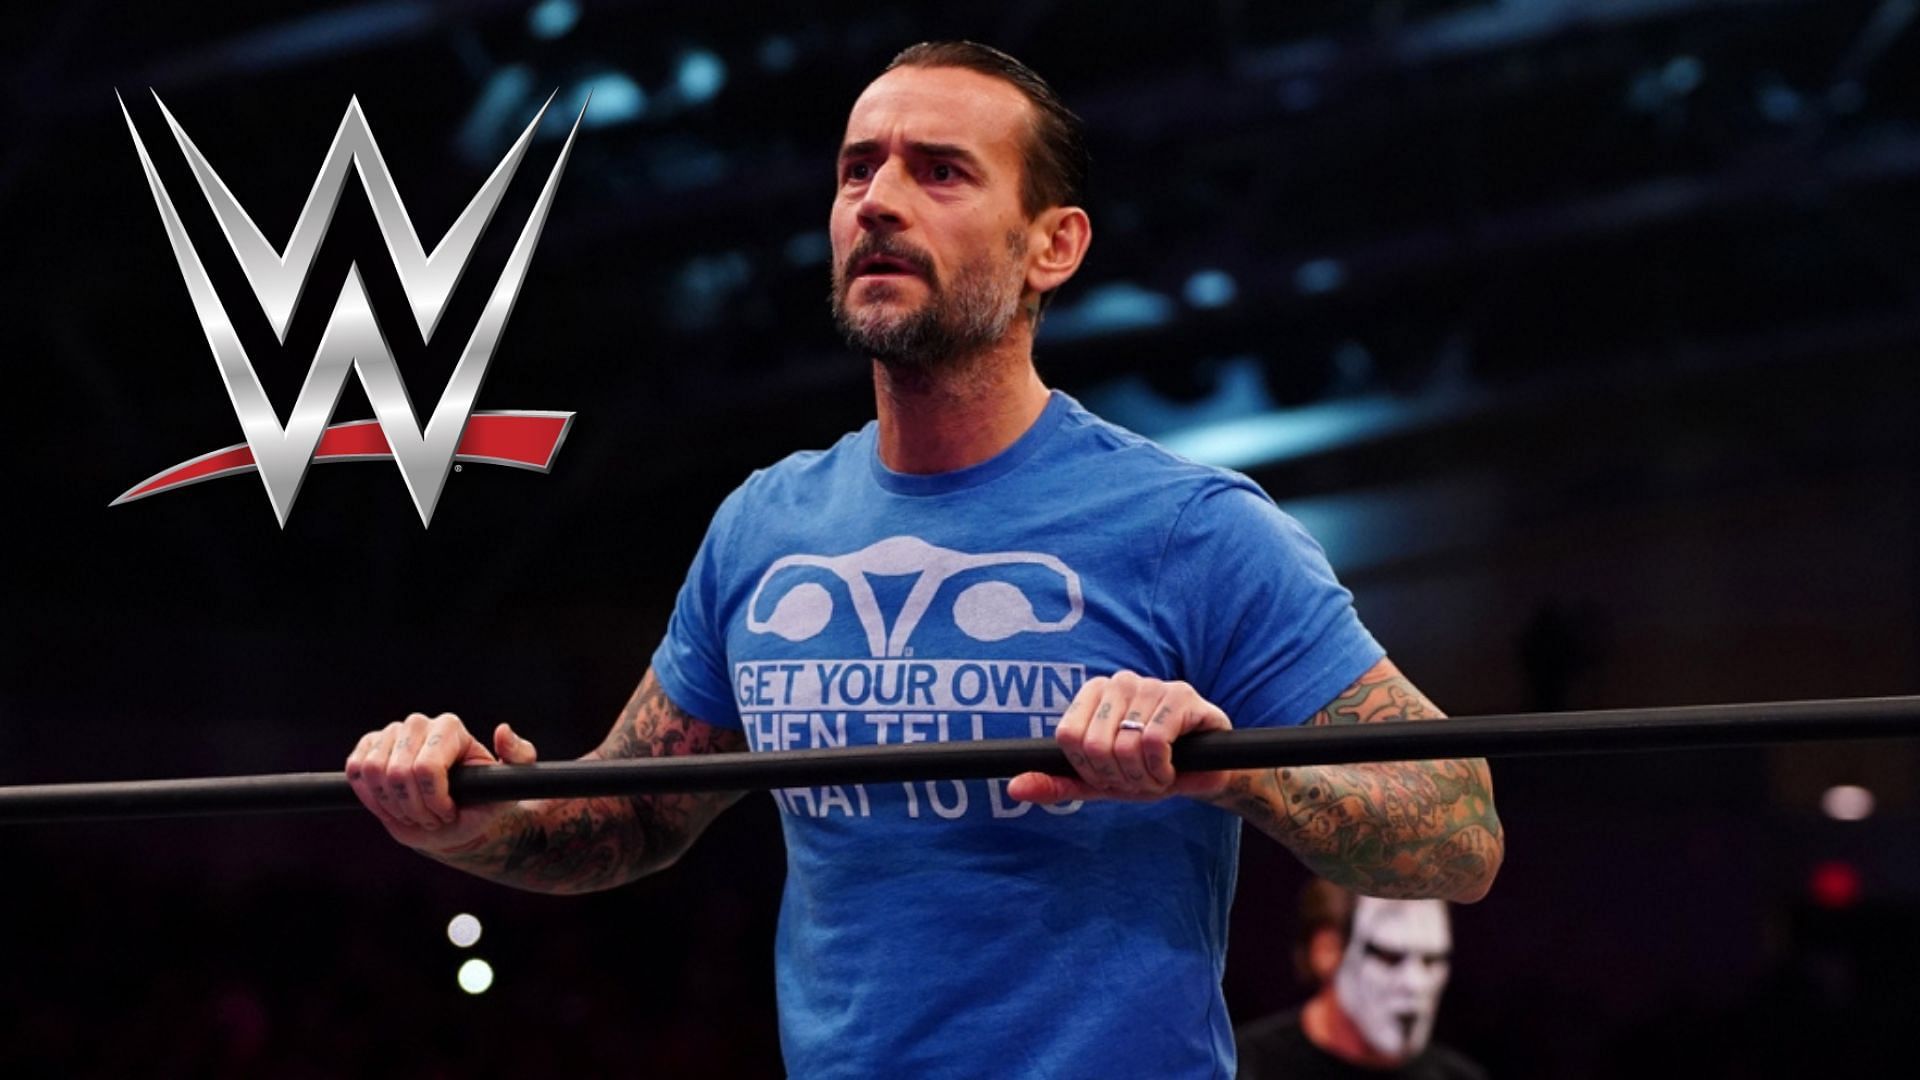 CM Punk has been a hot topic lately